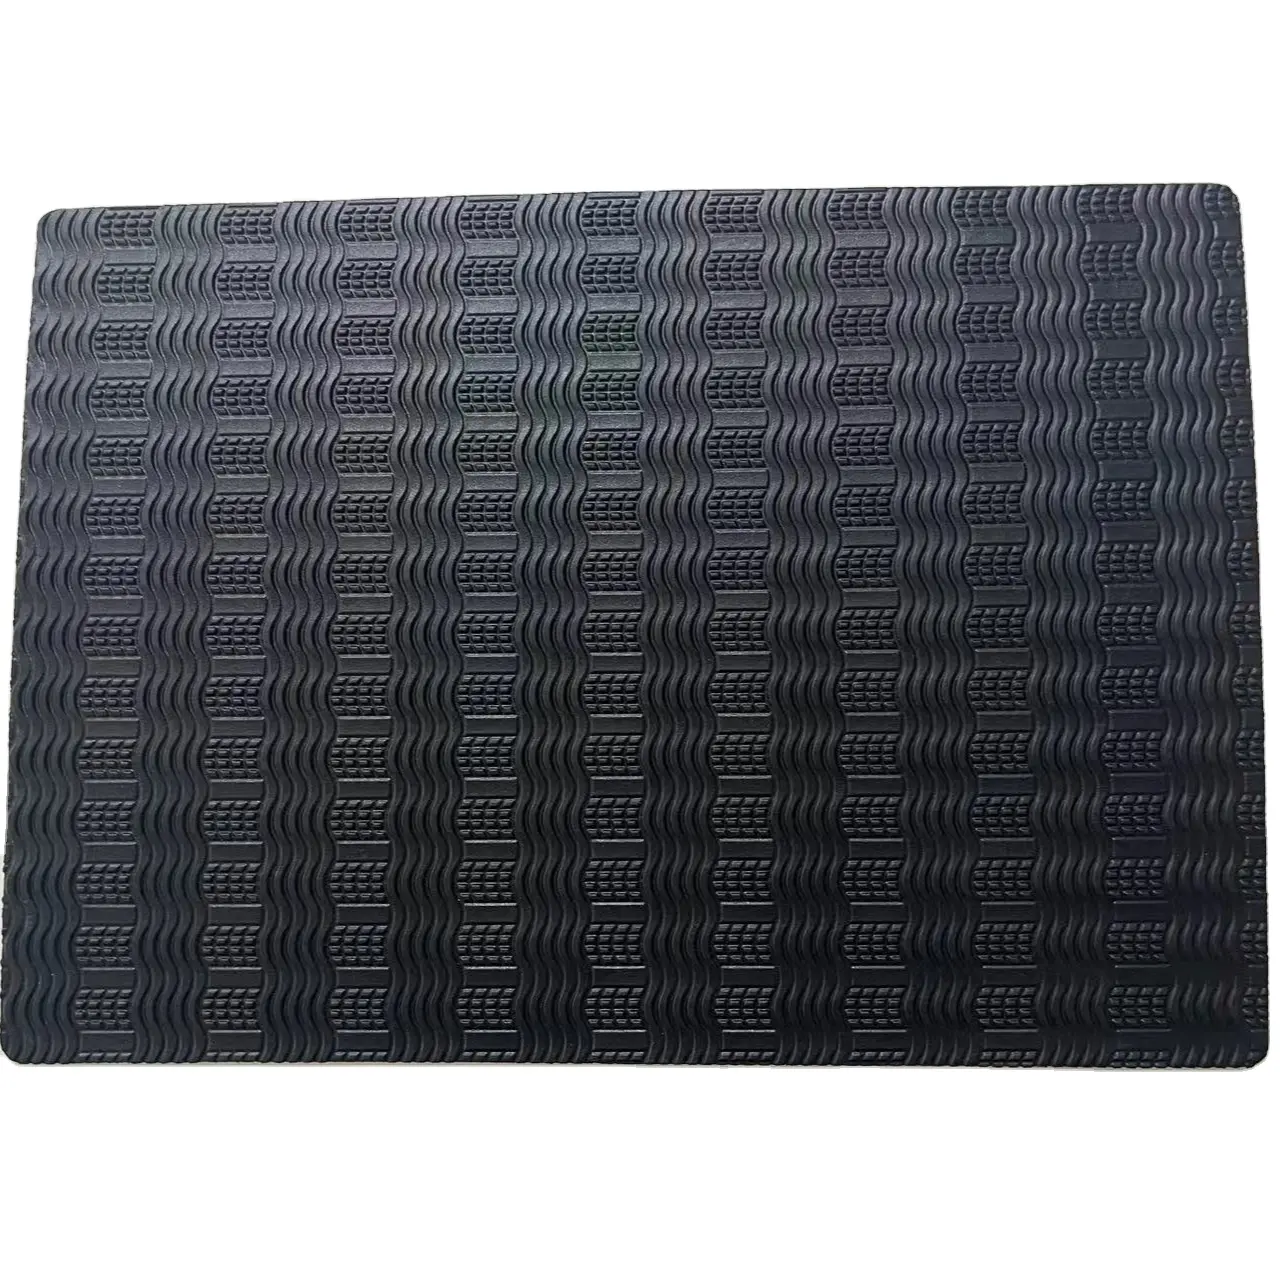 wholesale hot sale Black Rubber Sheet prevent slippery and wear-resisting for shoe Sole Rubber Sheets